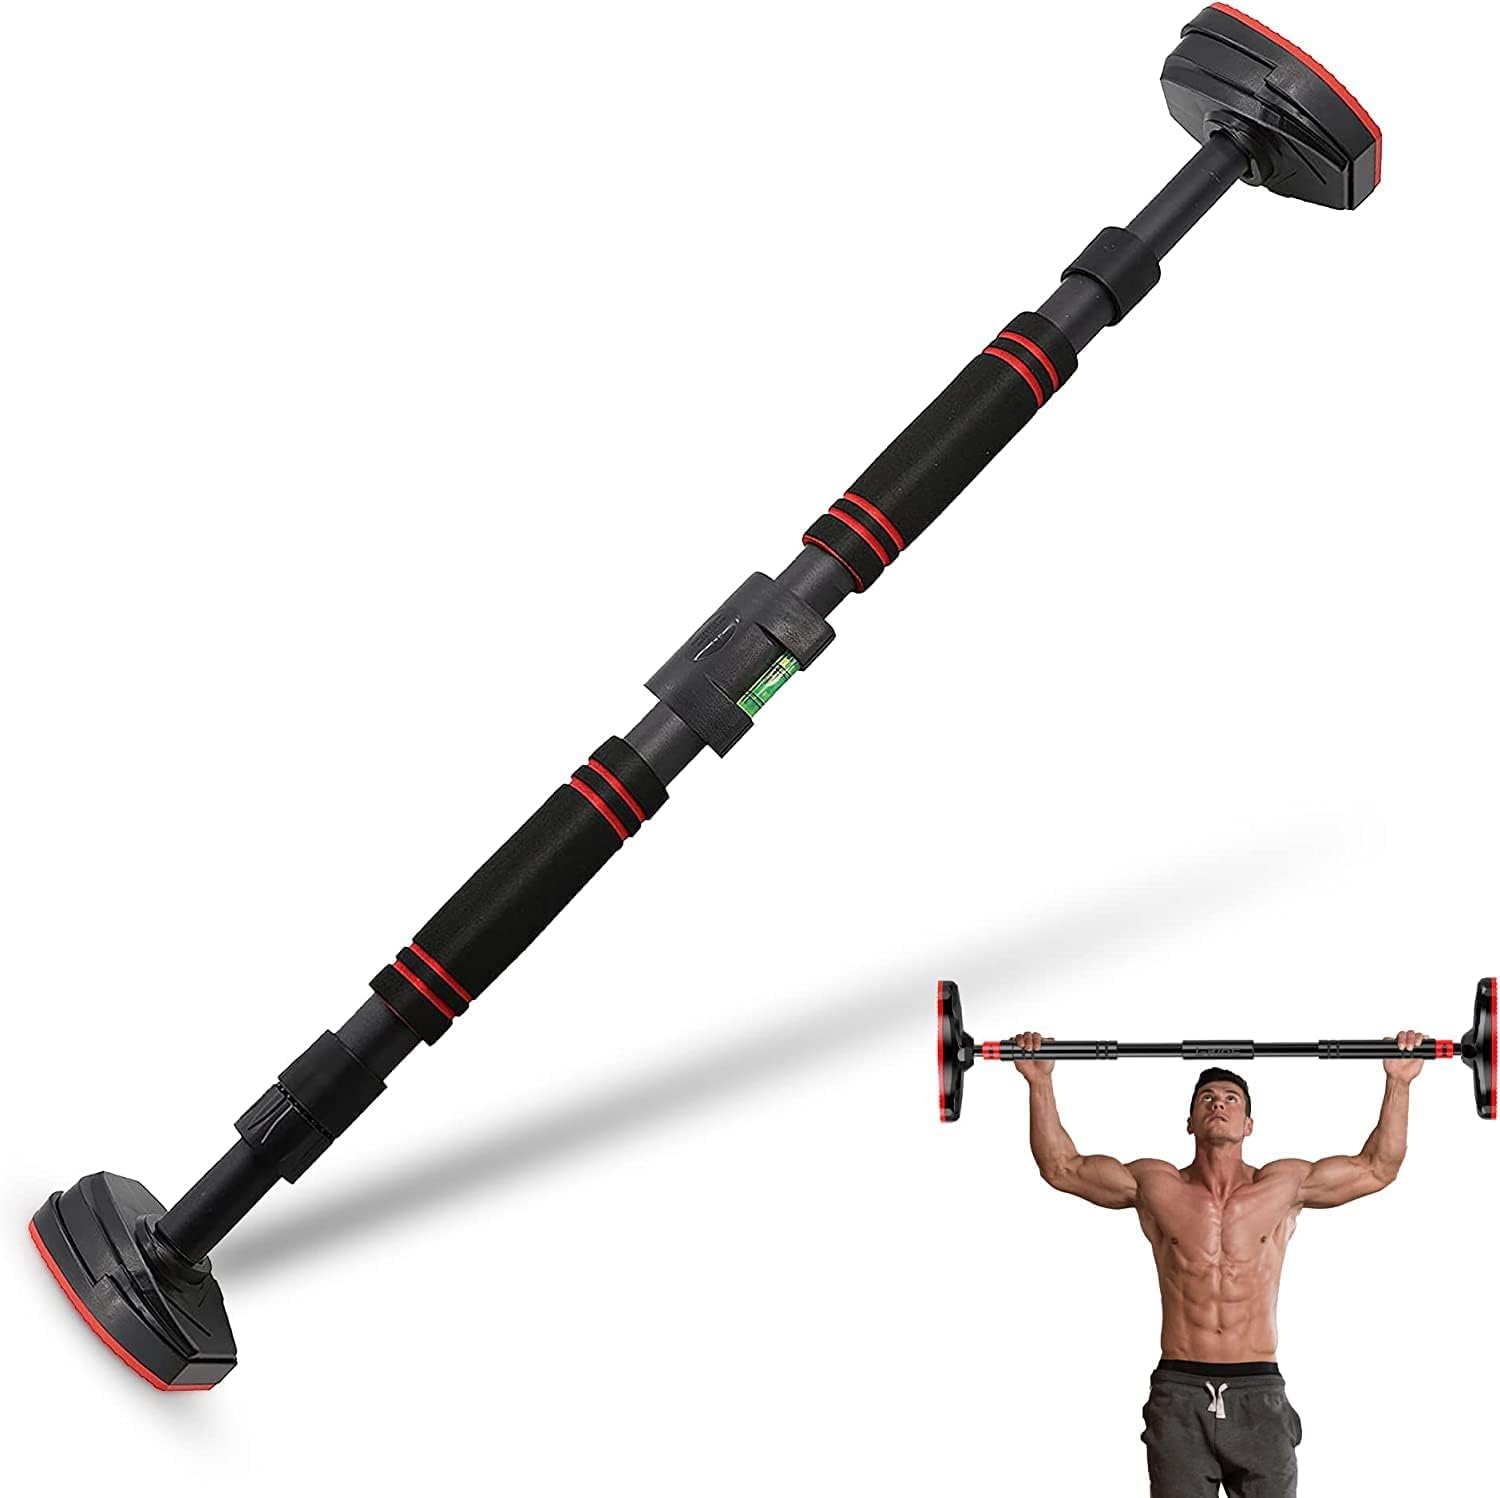 Adjustable Wall Mounted Pull up Bar with Comfortable Grip Handles for Pull-Ups Chin-Ups Fitness Training - Muscle Development and Various Bodyweight Workout for Home Gym Indoor and Outdoor.